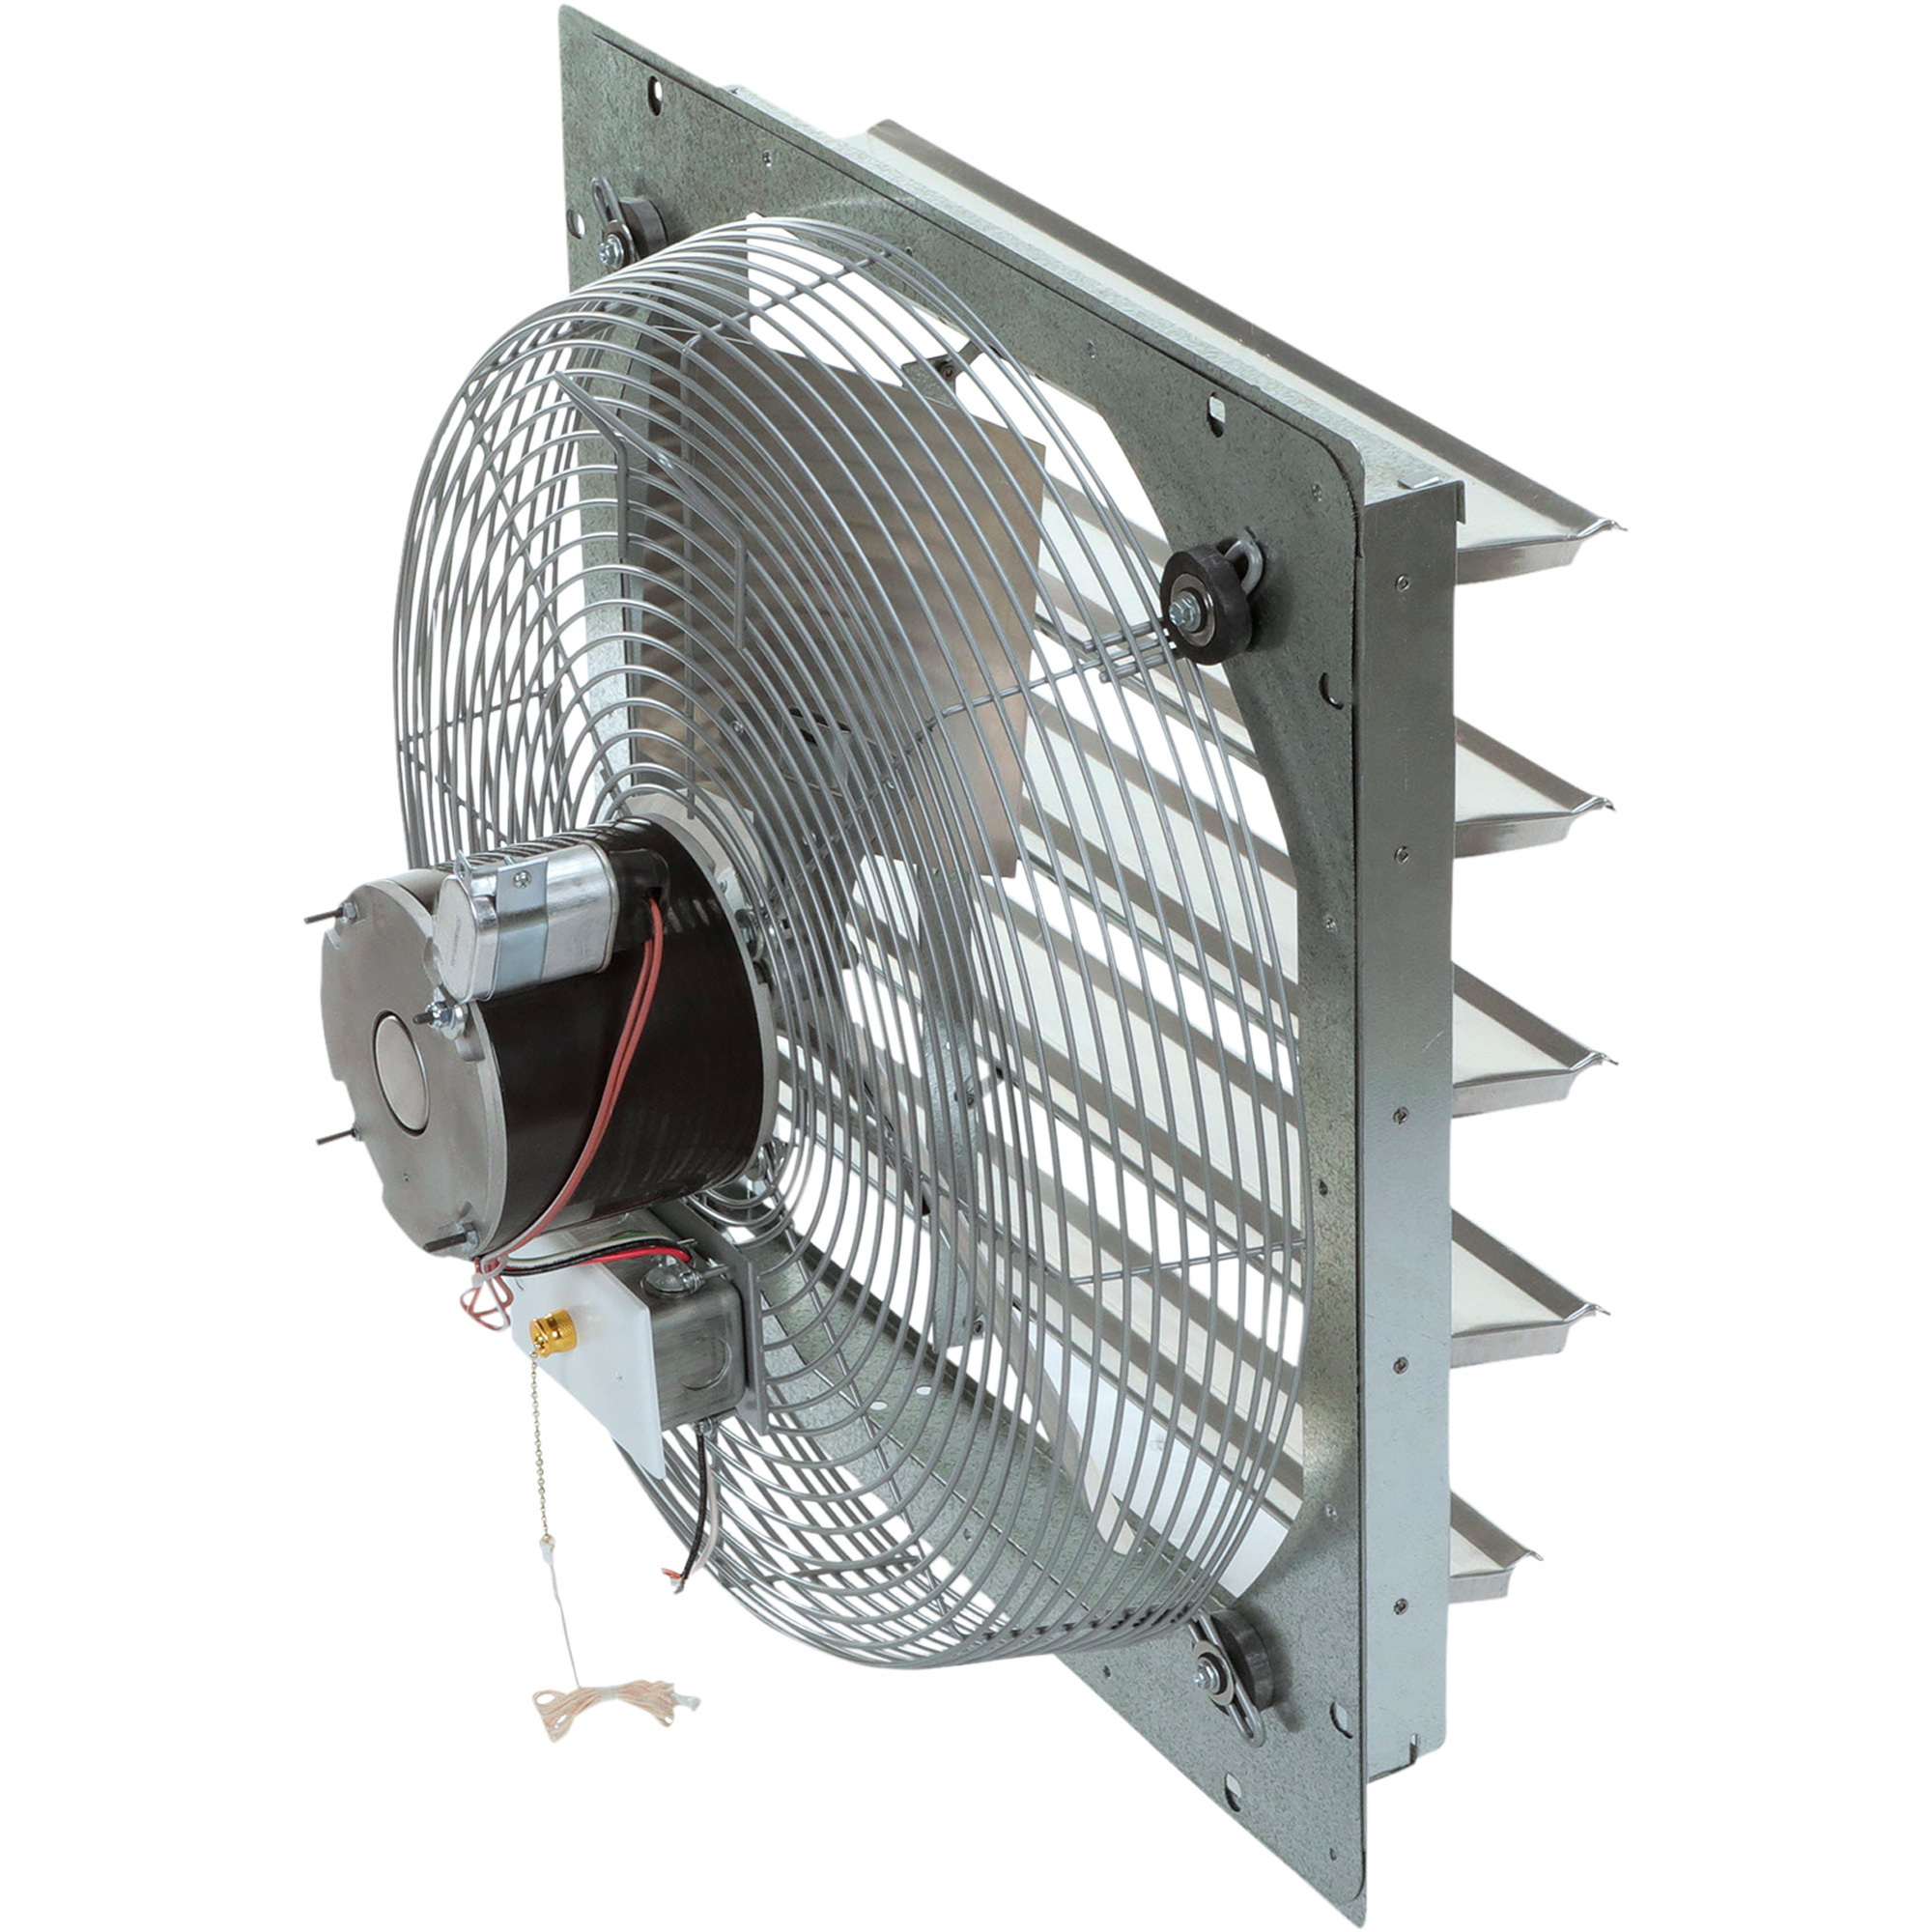 TPI Shutter-Mounted Direct Drive Exhaust Fan — 20Inch, 2925 CFM, 1/4 HP, Model CE-20-DS -  CE 20-DS